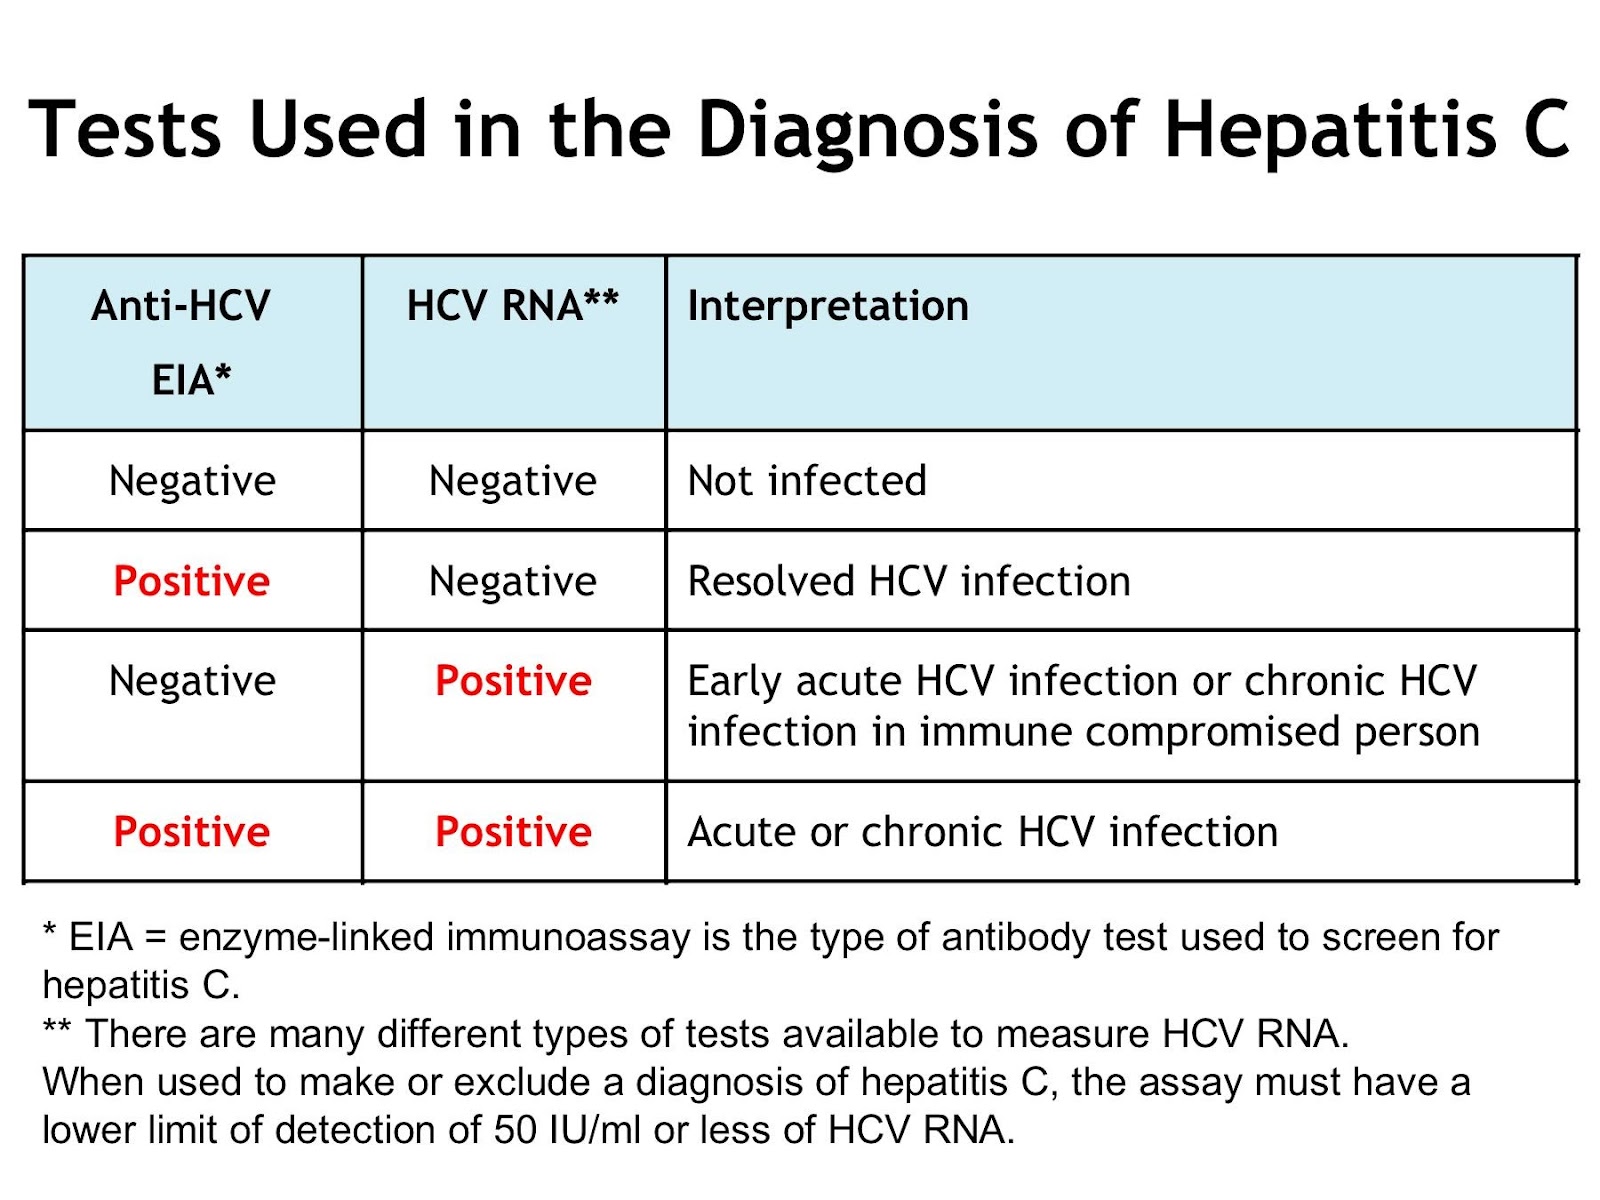 HEALTH FROM TRUSTED SOURCES: Hepatitis C